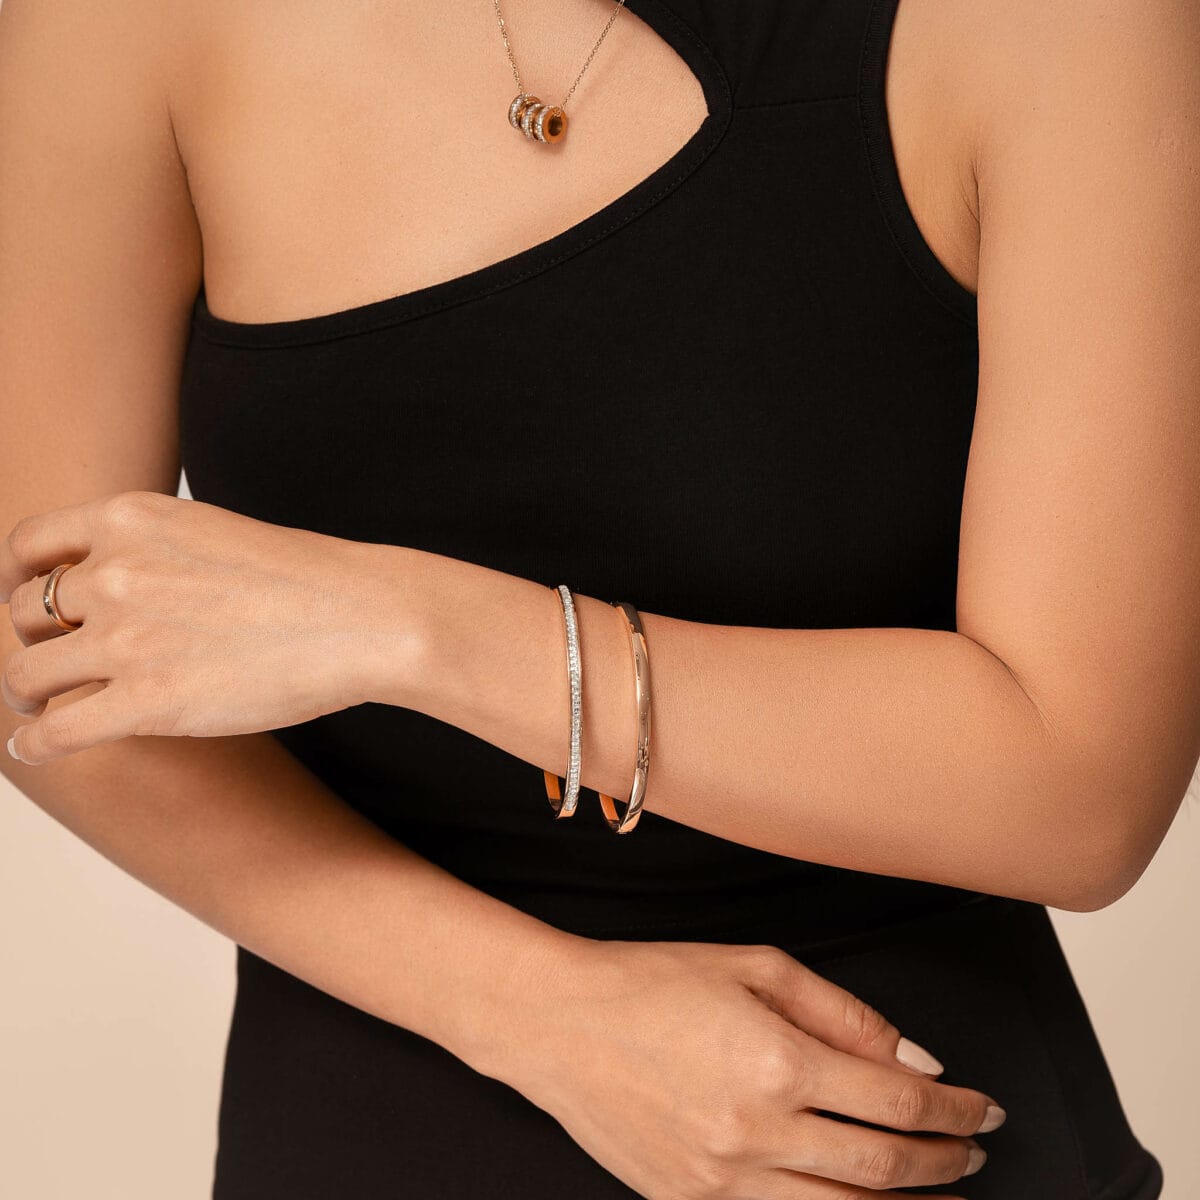 https://m.clubbella.co/product/candice/ Candice & Mannie rose gold bangle (3)